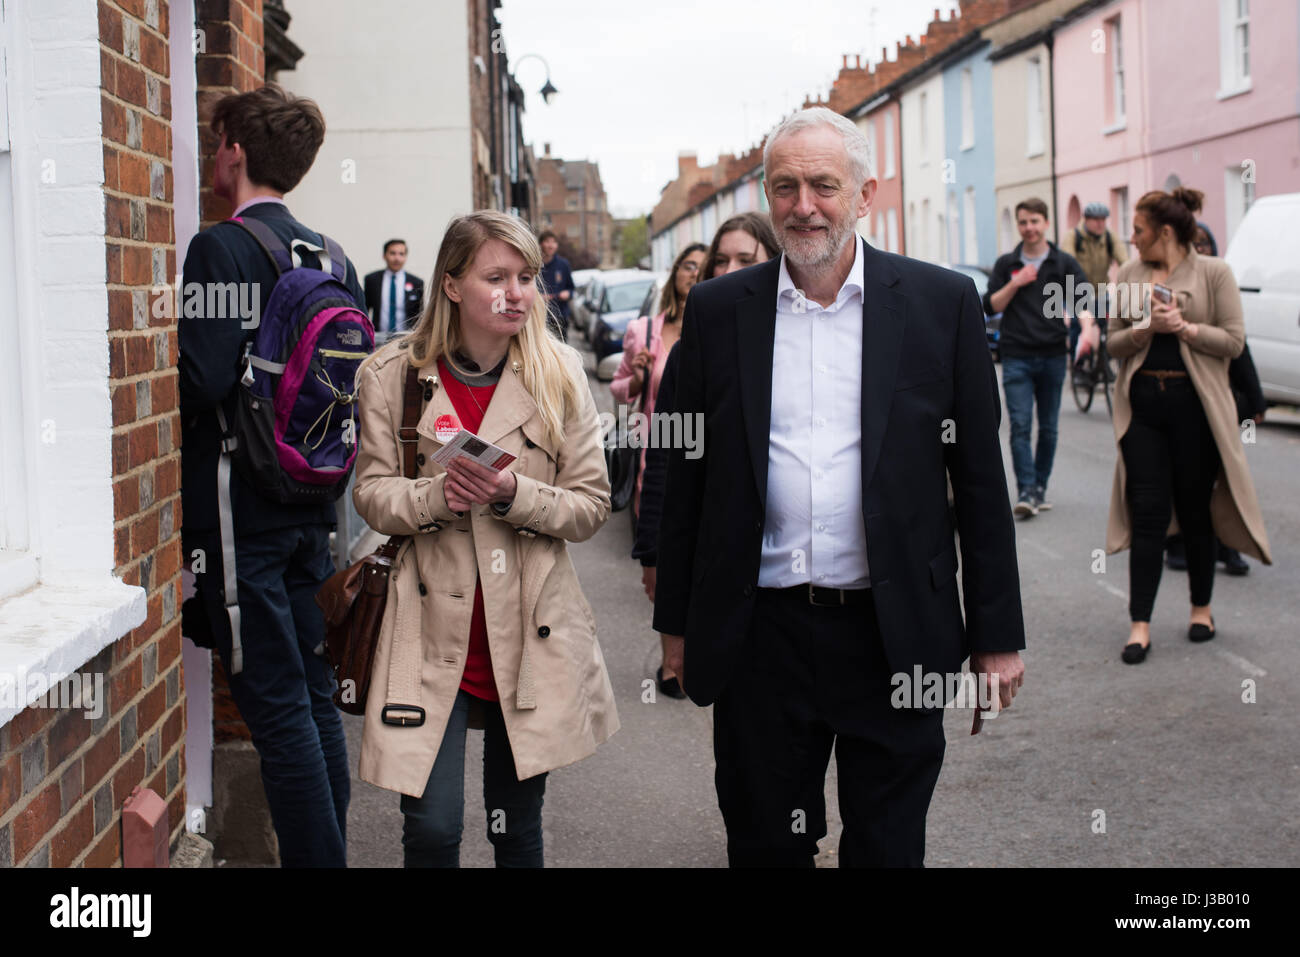 London, UK. 4th May, 2017. Labour leader Jeremy Corbyn joined local Labour county council candidate, Emma Turnball, to knock on doors in Oxford on polling day for local elections across the country. Student Labour activists from Oxford University joined Corbyn and Turnball as they spoke to voters. Credit: Jacob Sacks-Jones/Alamy Live News. Stock Photo